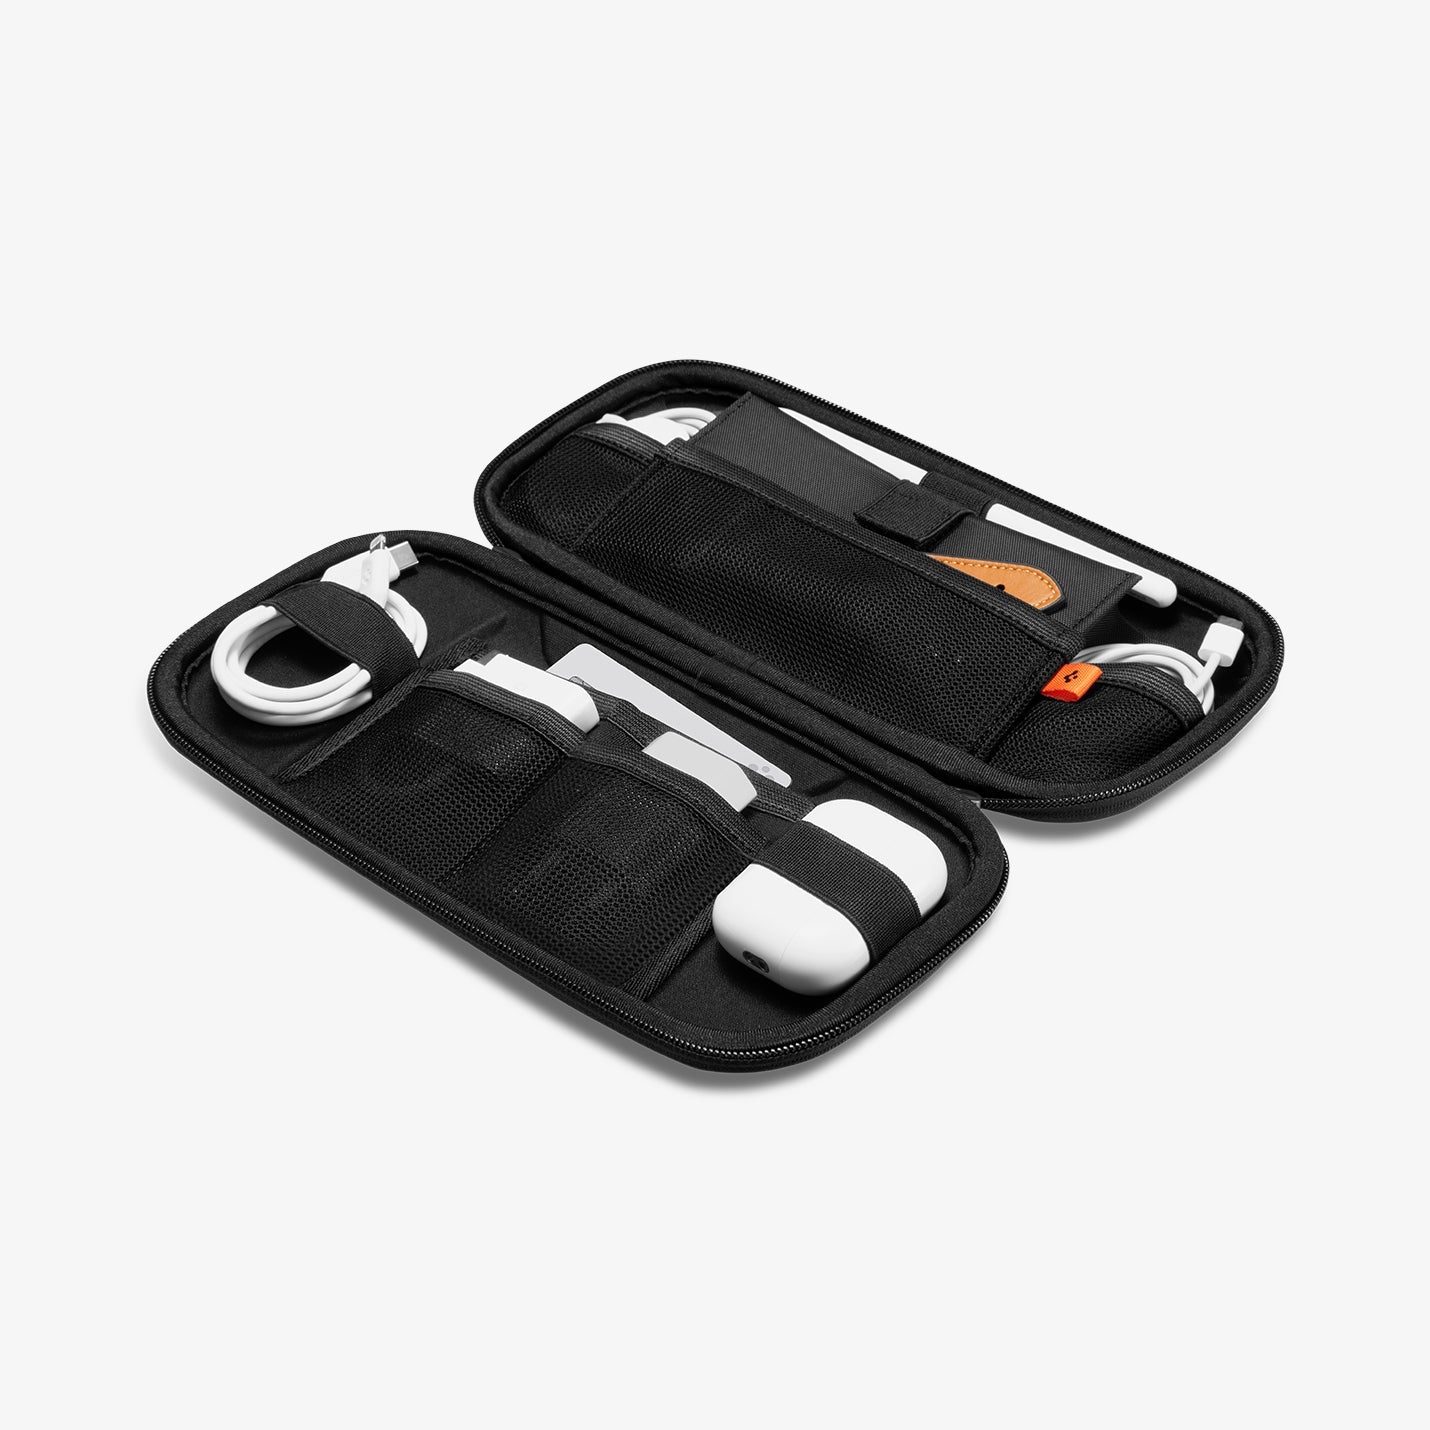 AFA05509 - Rugged Armor® Pro Slim Cable Organizer Bag in black showing the inside of bag with cables, airpods and pencil inserted in slots